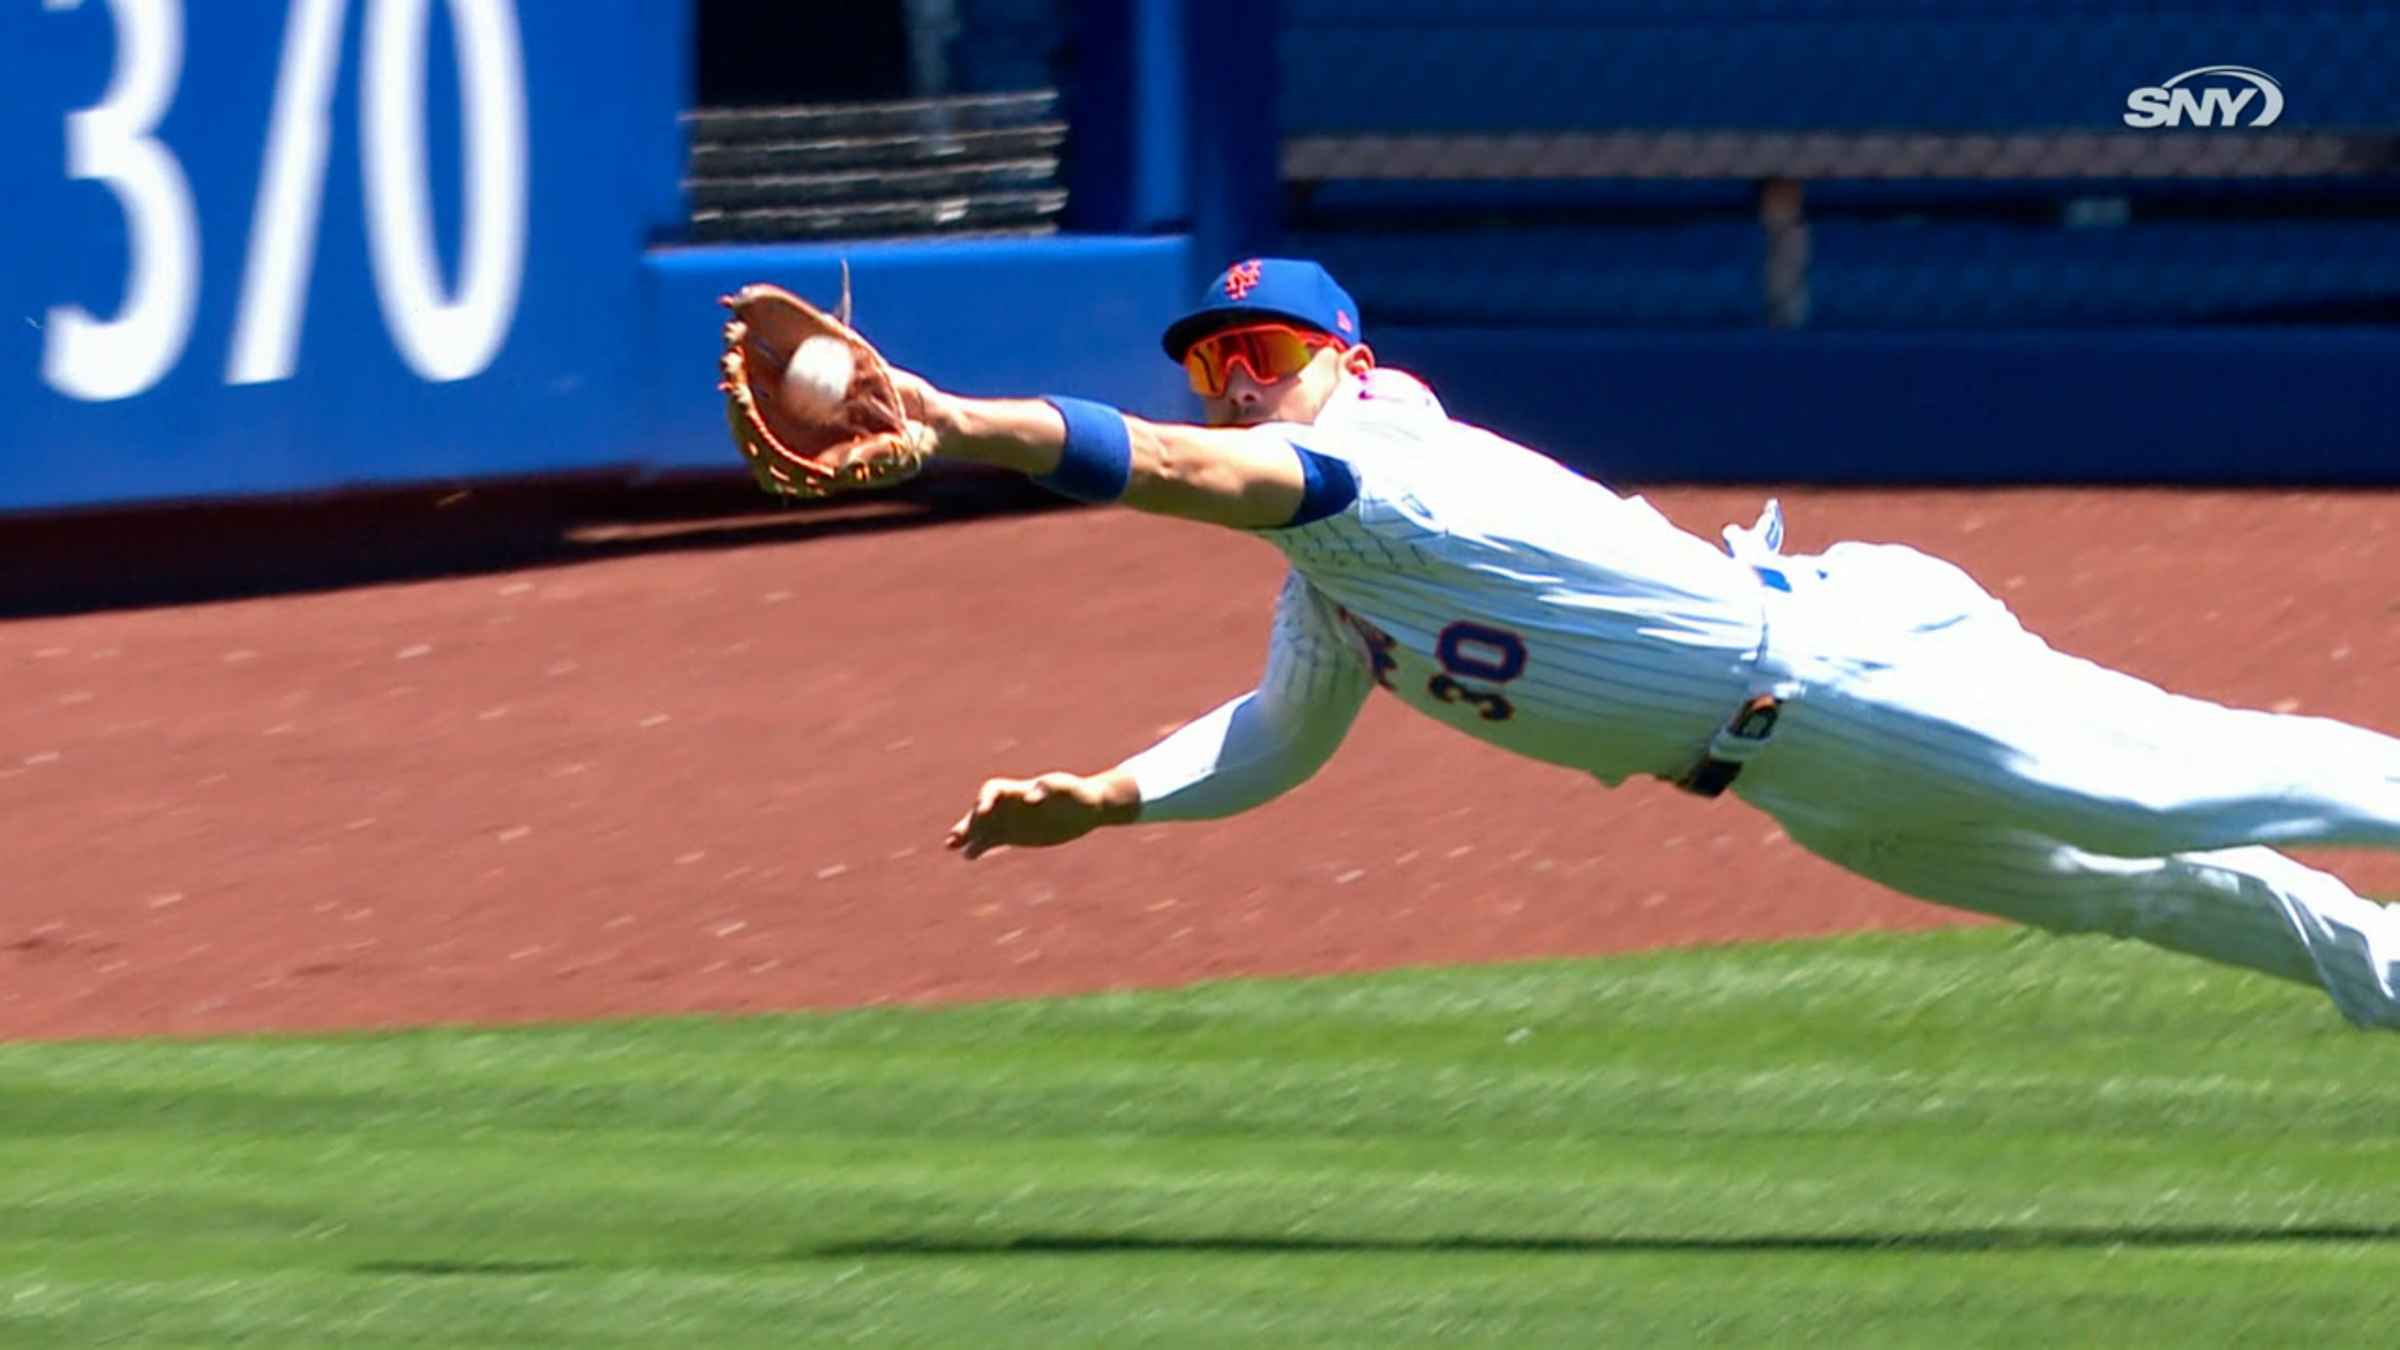 Conforto saves the day with incredible catch in NY Mets' comeback win